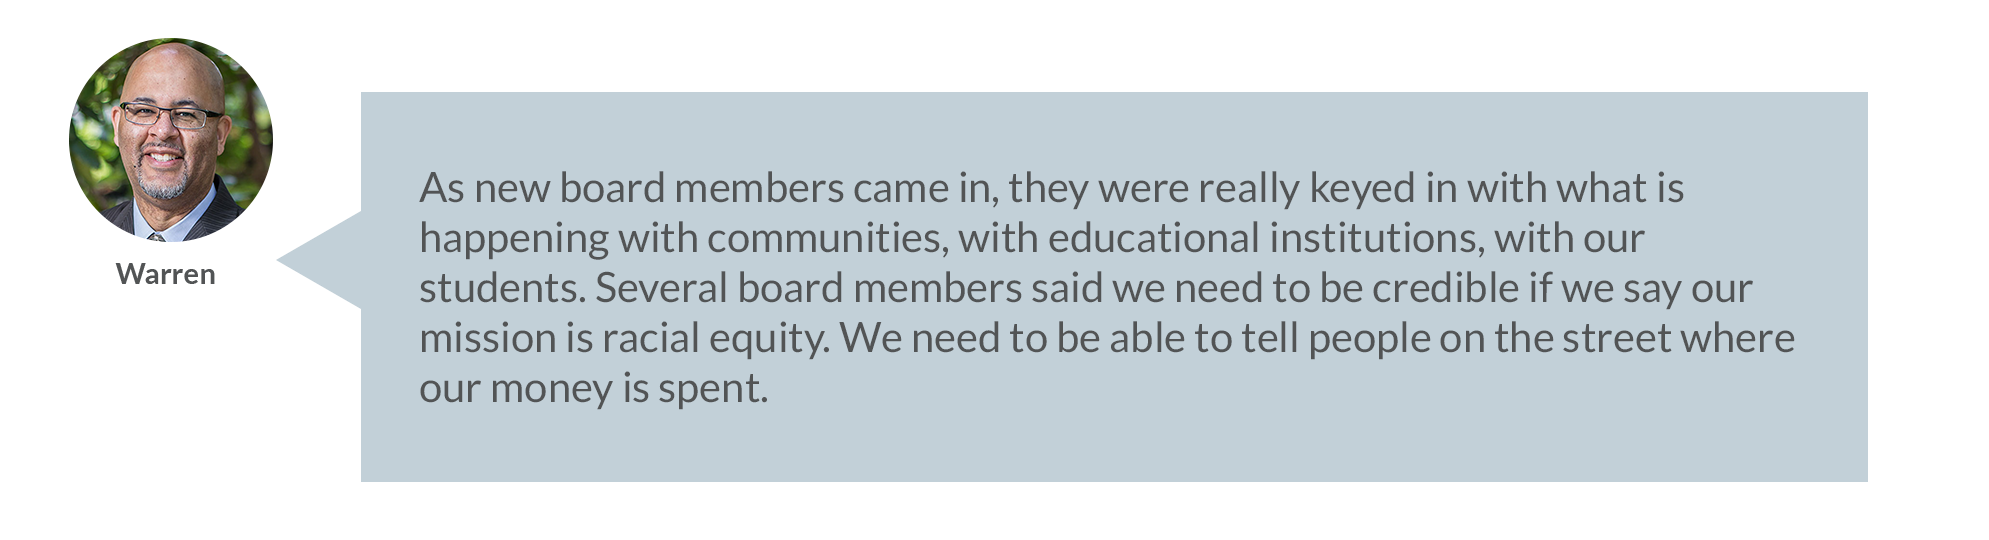 As new board members came in, they were really keyed in with what is happening with communities, with educational institutions, with our students. Several board members sad we need to be credible if we say our mission is racial equity. We need to be able to tell people on the street where our money is spent. 